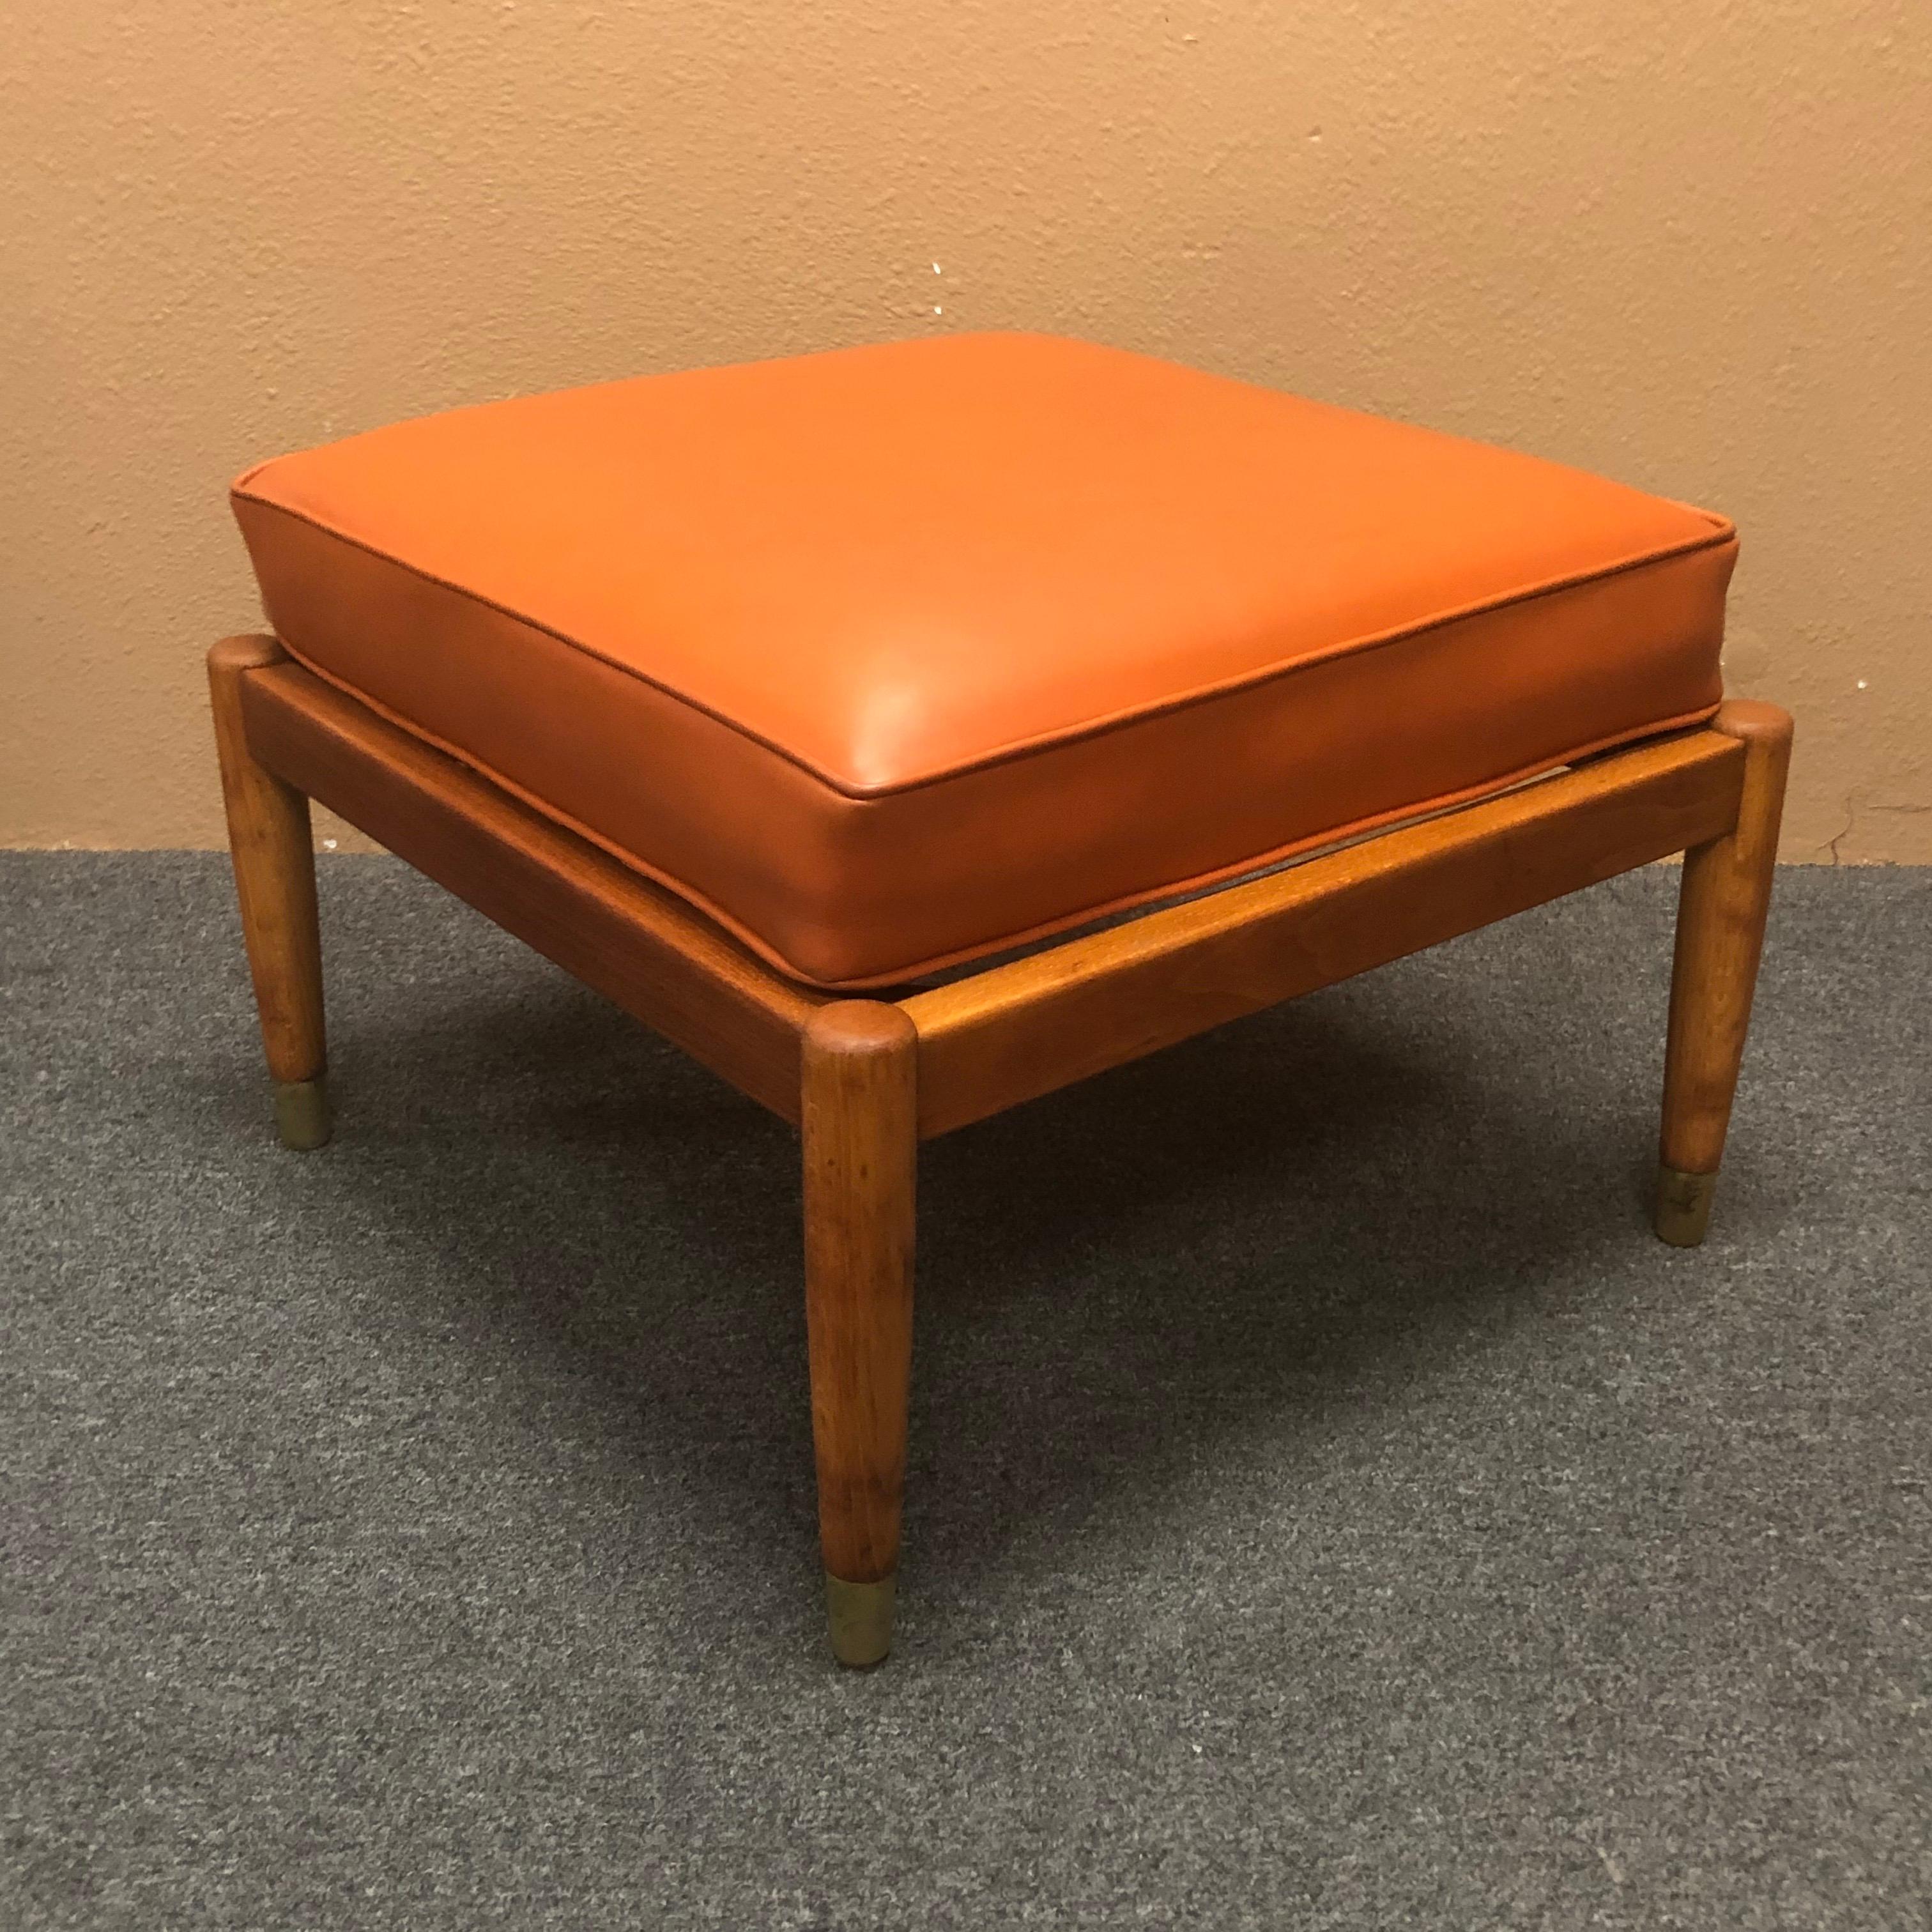 Versatile Scandinavian modern stool / ottoman / bench with floating butterscotch colored naugahyde cushion, circa 1950s. The piece has a solid teak frame with brass capped legs and is quite solid and sturdy. The bases measures: 22.5